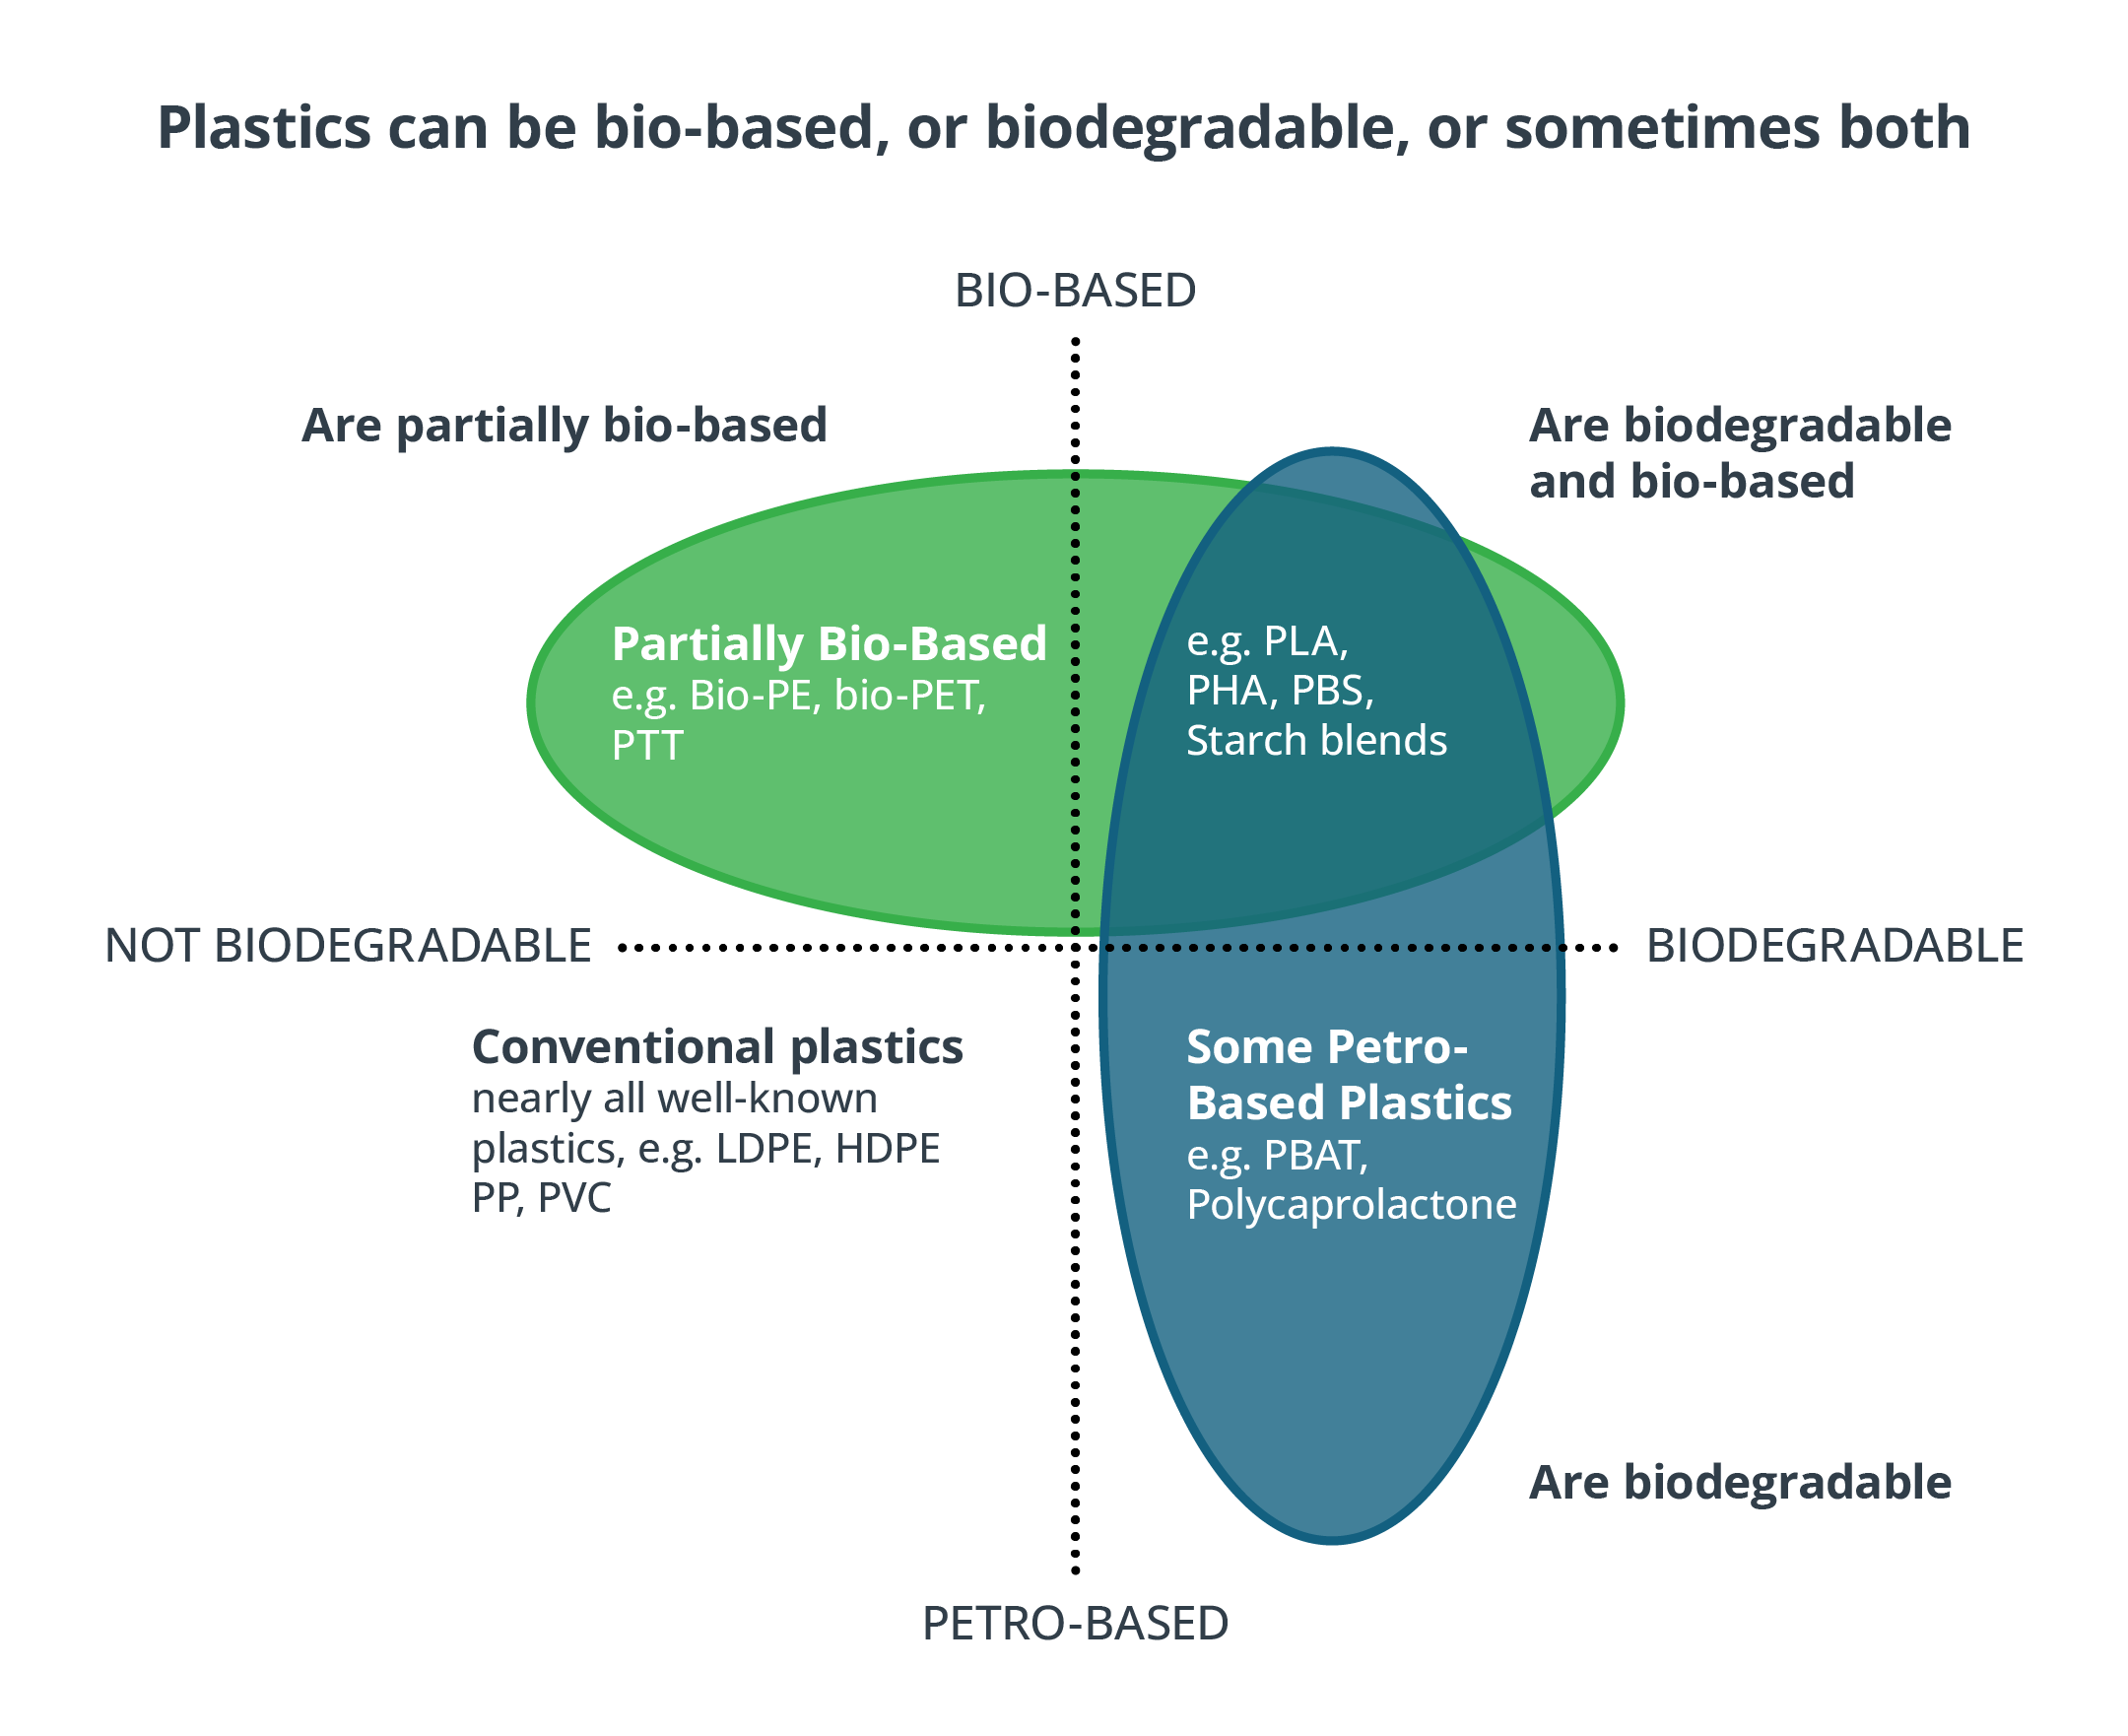 Plastic Packaging Material That is Both Sustainable and Biodegradable